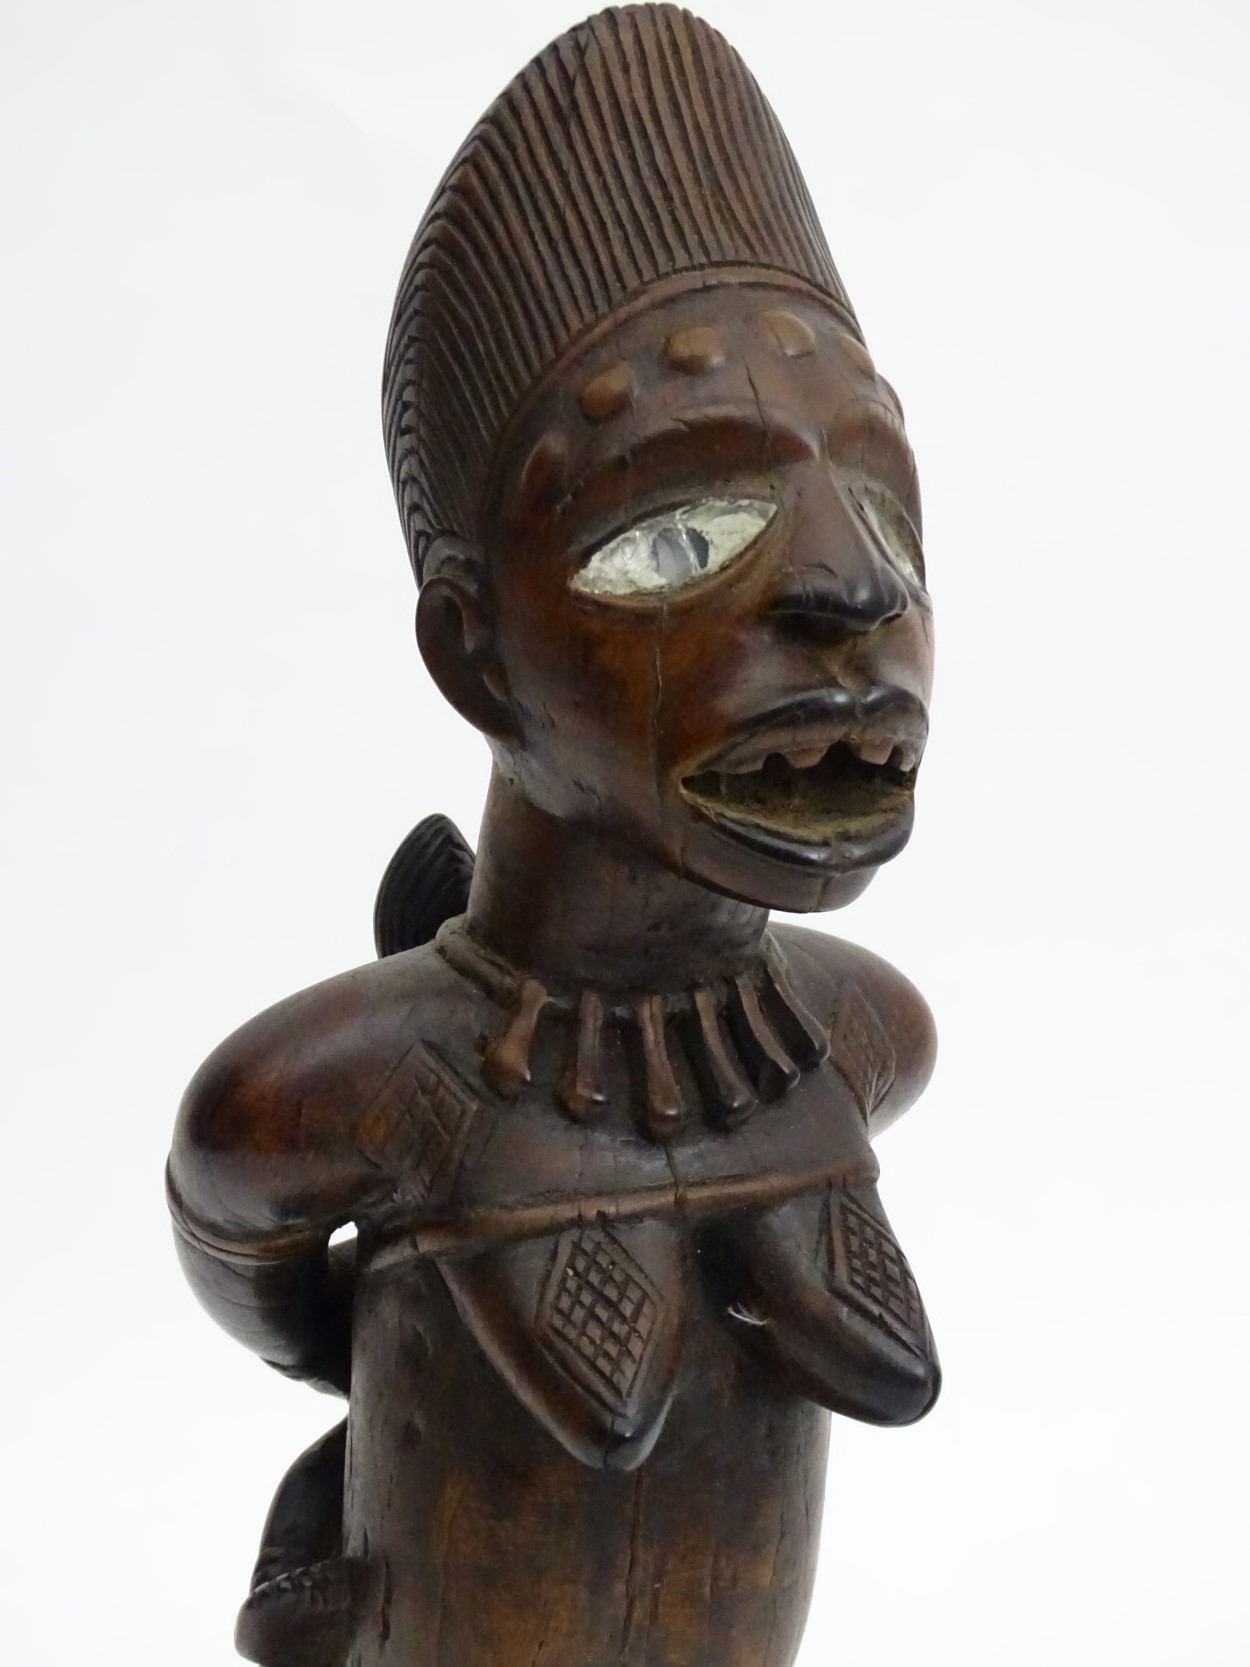 Tribal : An Ethnographic Native Tribal Kongo maternity figure. Approx. 18 1/2" high. - Image 11 of 11